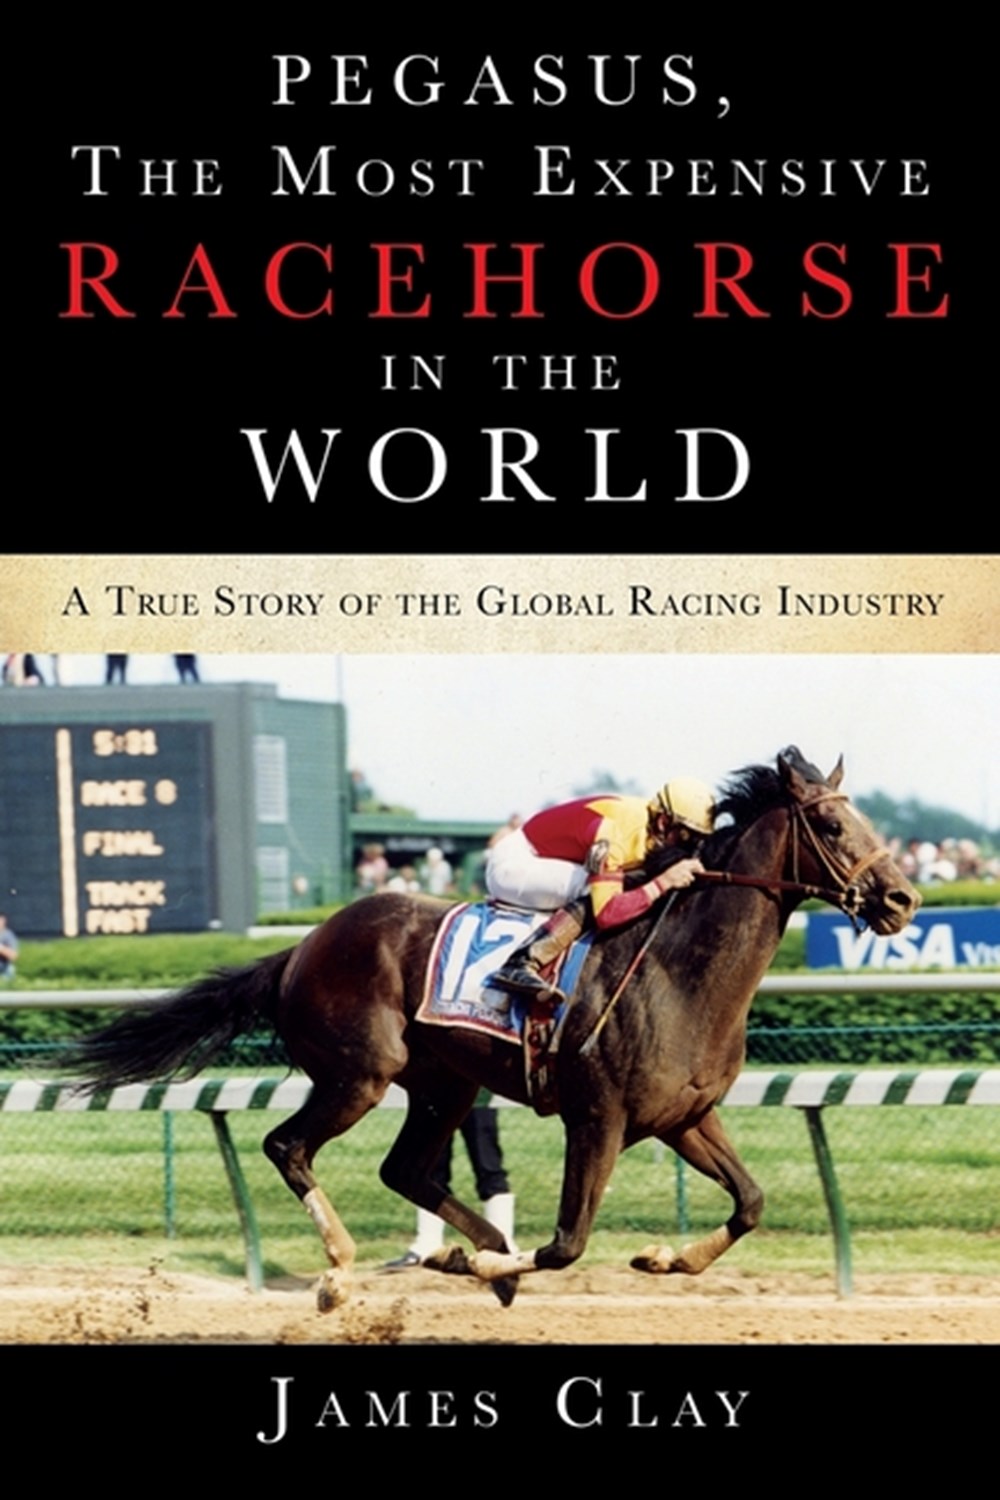 Pegasus, The Most Expensive Racehorse in the World A True Story of the Global Racing Industry